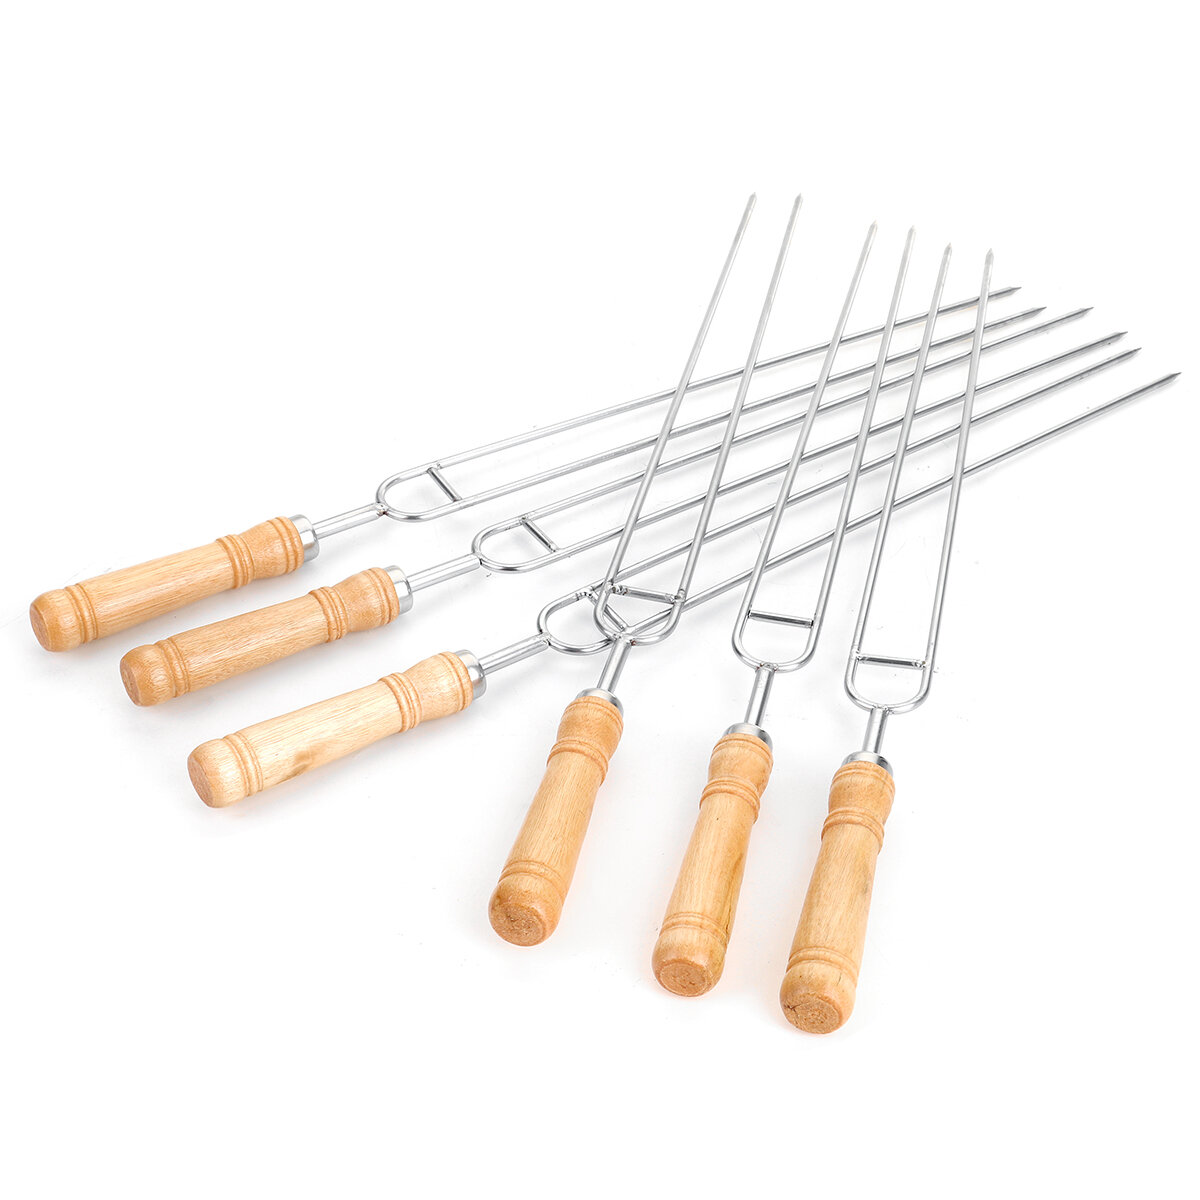 6PCS/Set Stainless Steel Wire BBQ Skewers Wood Handle Grill Roasting Sticks Outdoor Camping BBQ Tool